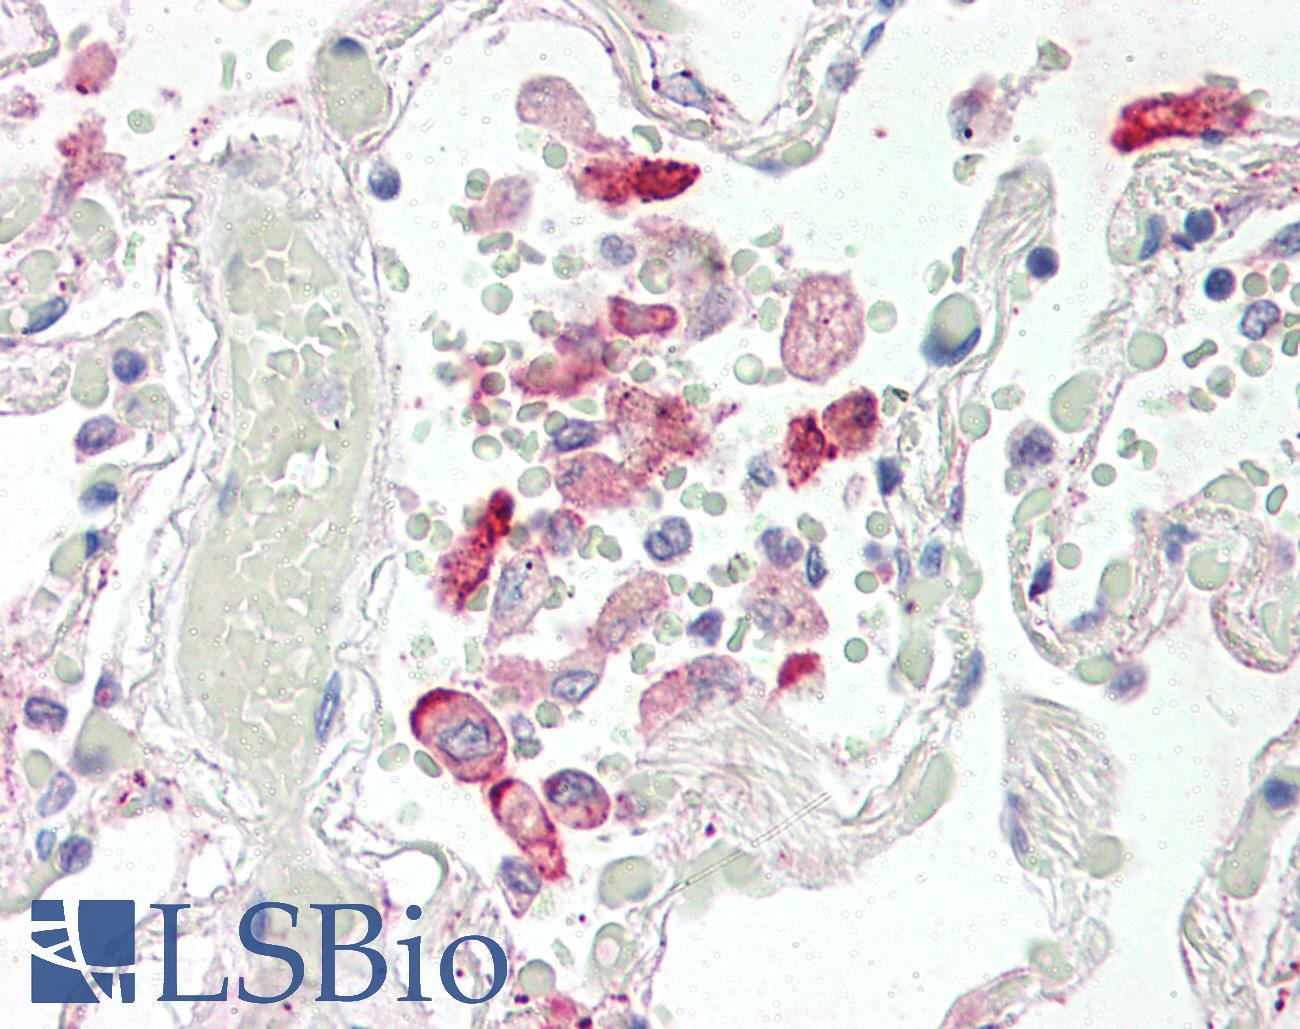 Carboxylesterase 1 / CES1 Antibody - Anti-CES1 antibody IHC of human lung. Immunohistochemistry of formalin-fixed, paraffin-embedded tissue after heat-induced antigen retrieval. Antibody concentration 5 ug/ml.